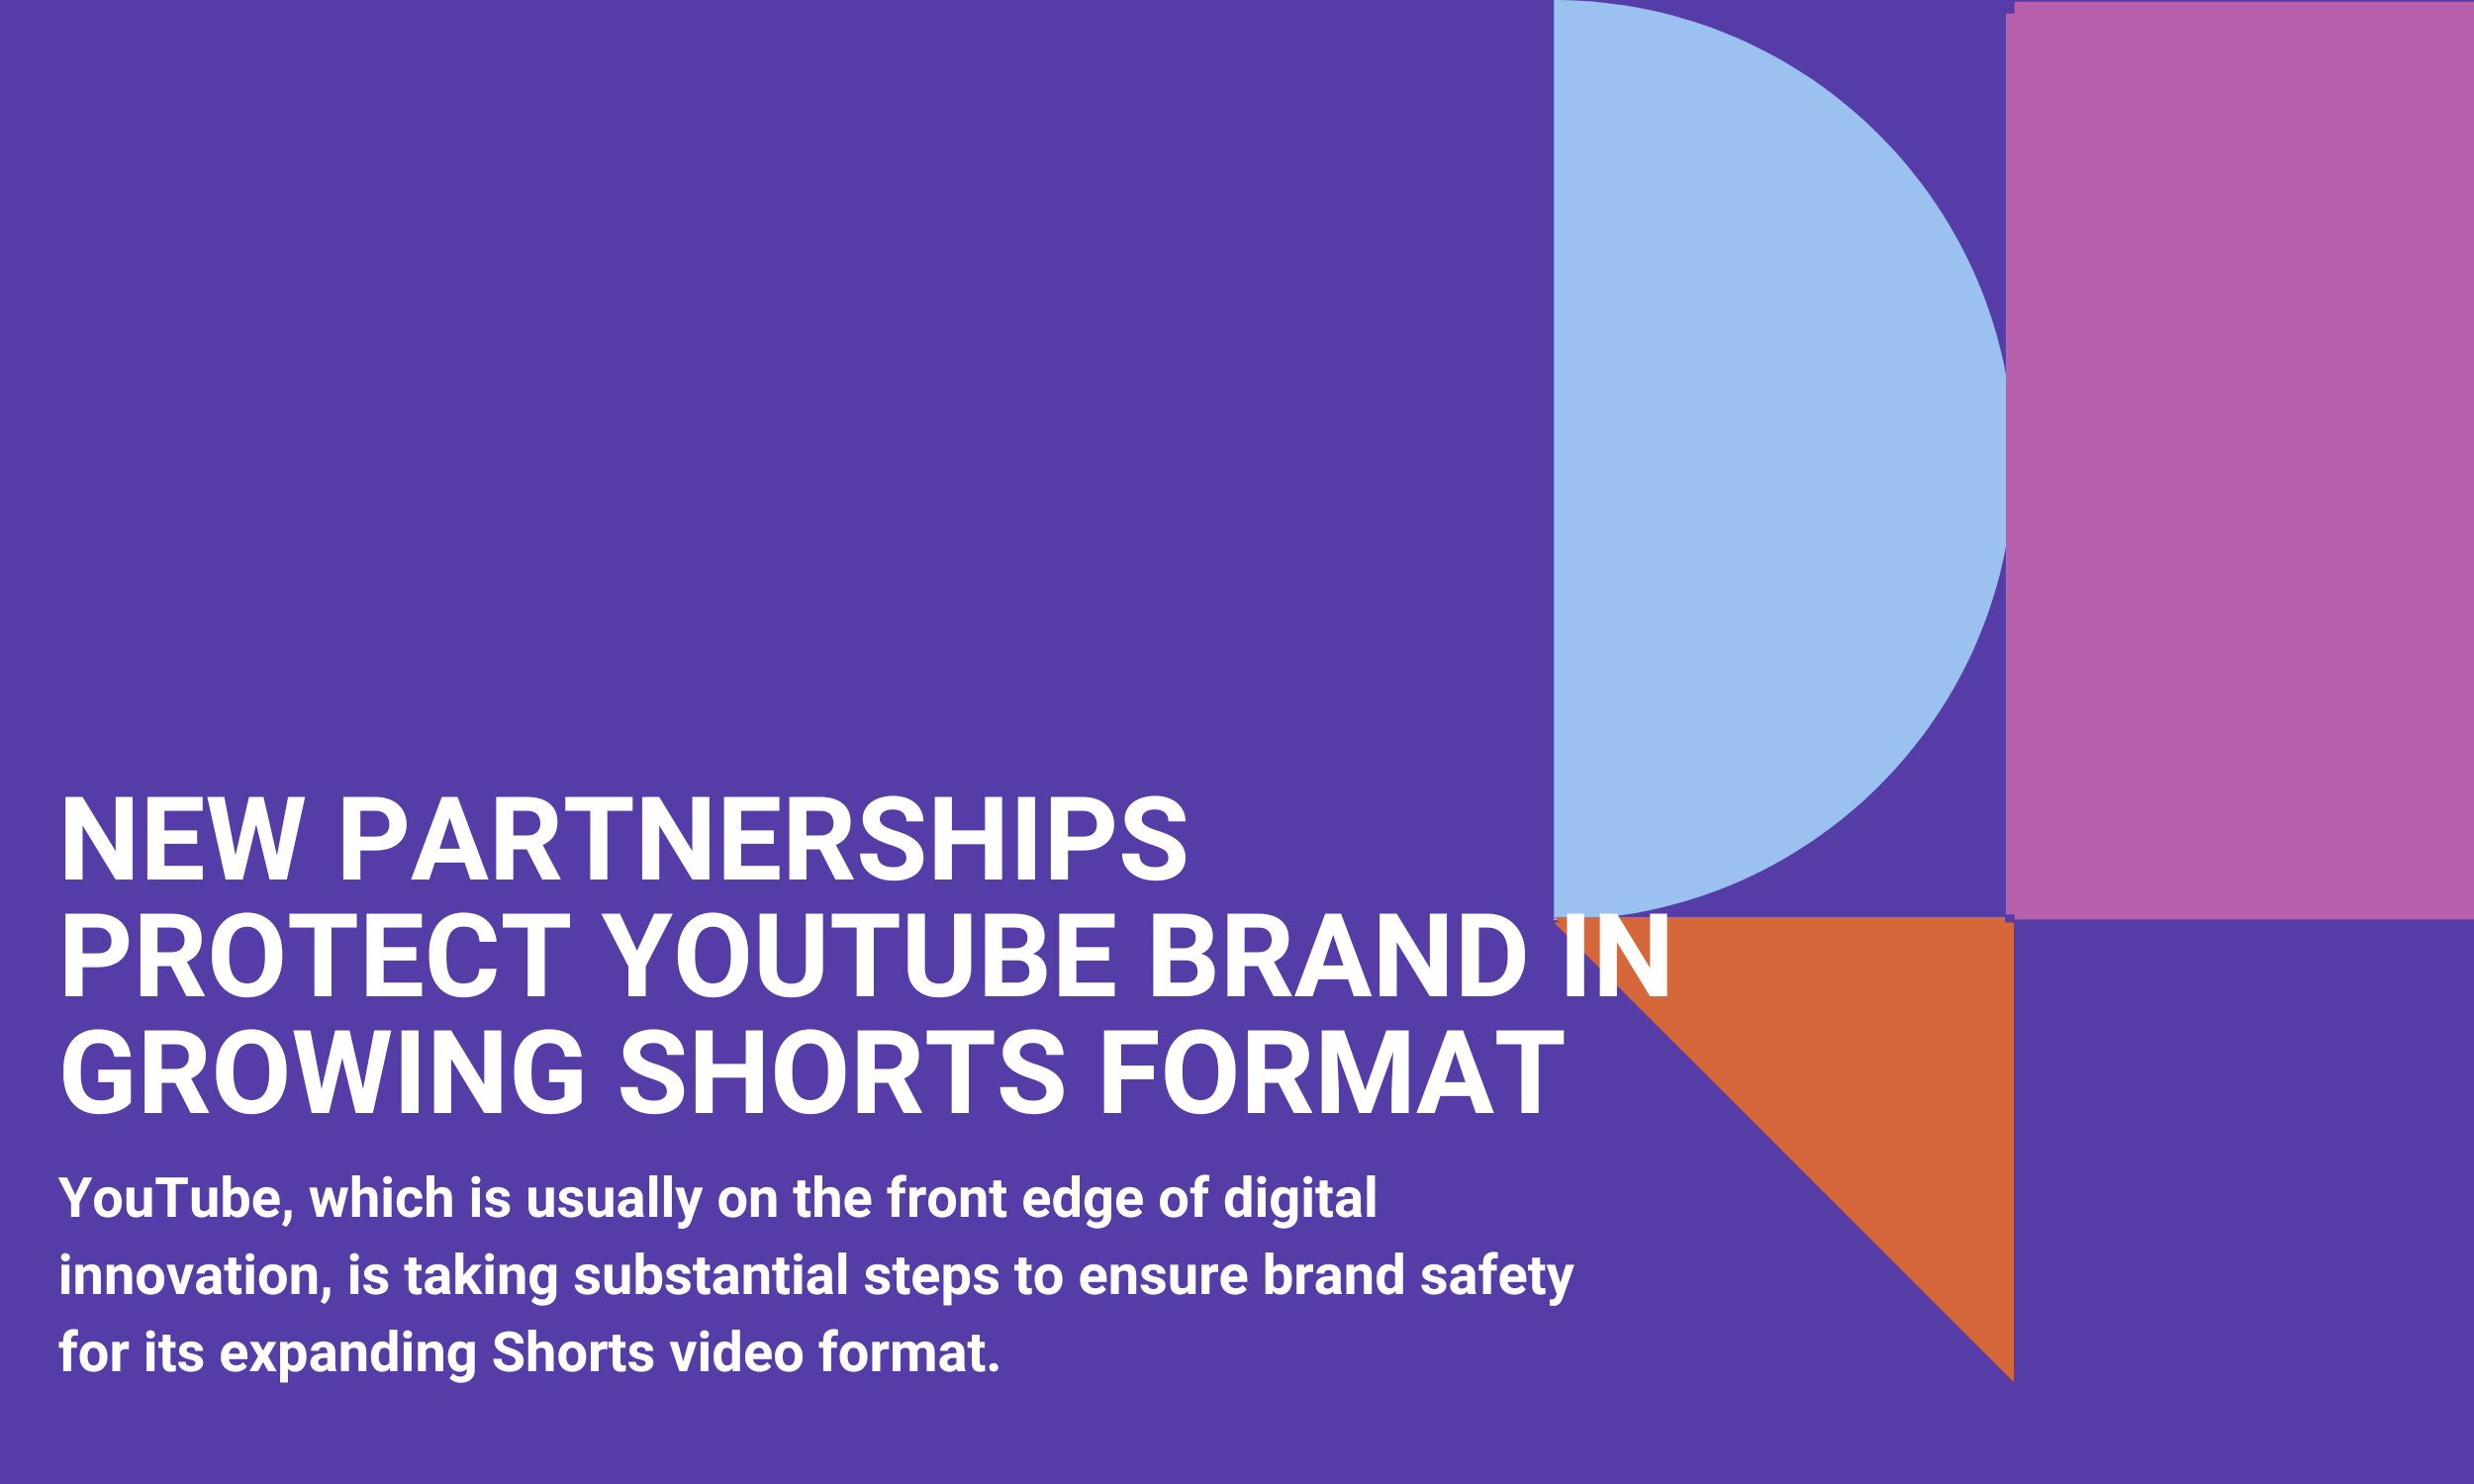 New Partnerships Protect YouTube Brand in Growing Shorts Format